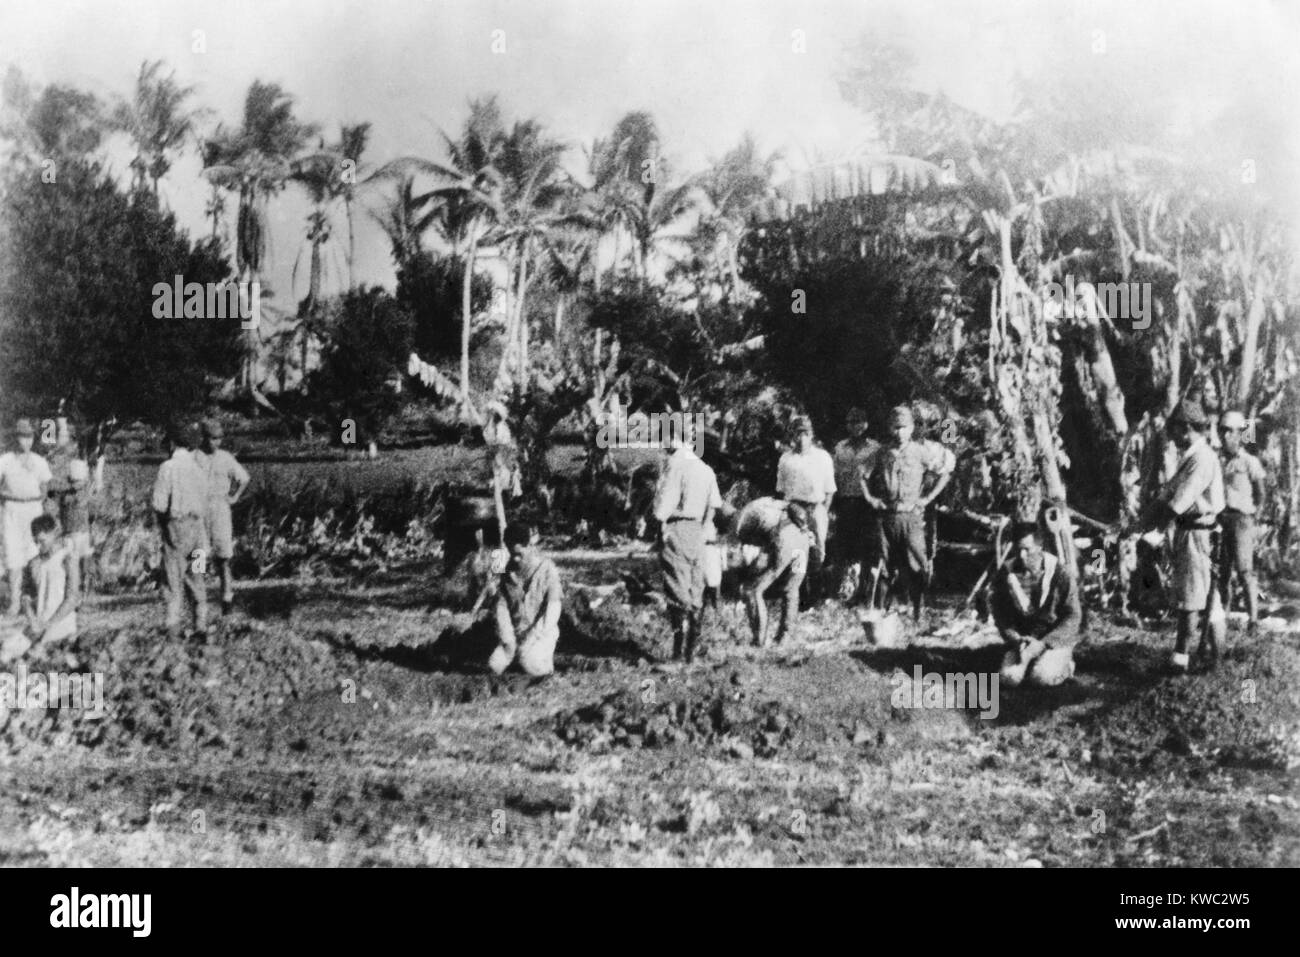 Three men kneel before their open graves on Guam in 1941. Behind them are Japanese soldiers about to decapitate them with swords. Photo was made shortly after the seizure of Guam by the Japanese. Photo was obtained in 1945 from a Japanese soldier who said it was circulated among them for 'morale' purposes. World War 2. (BSLOC 2015 13 116) Stock Photo